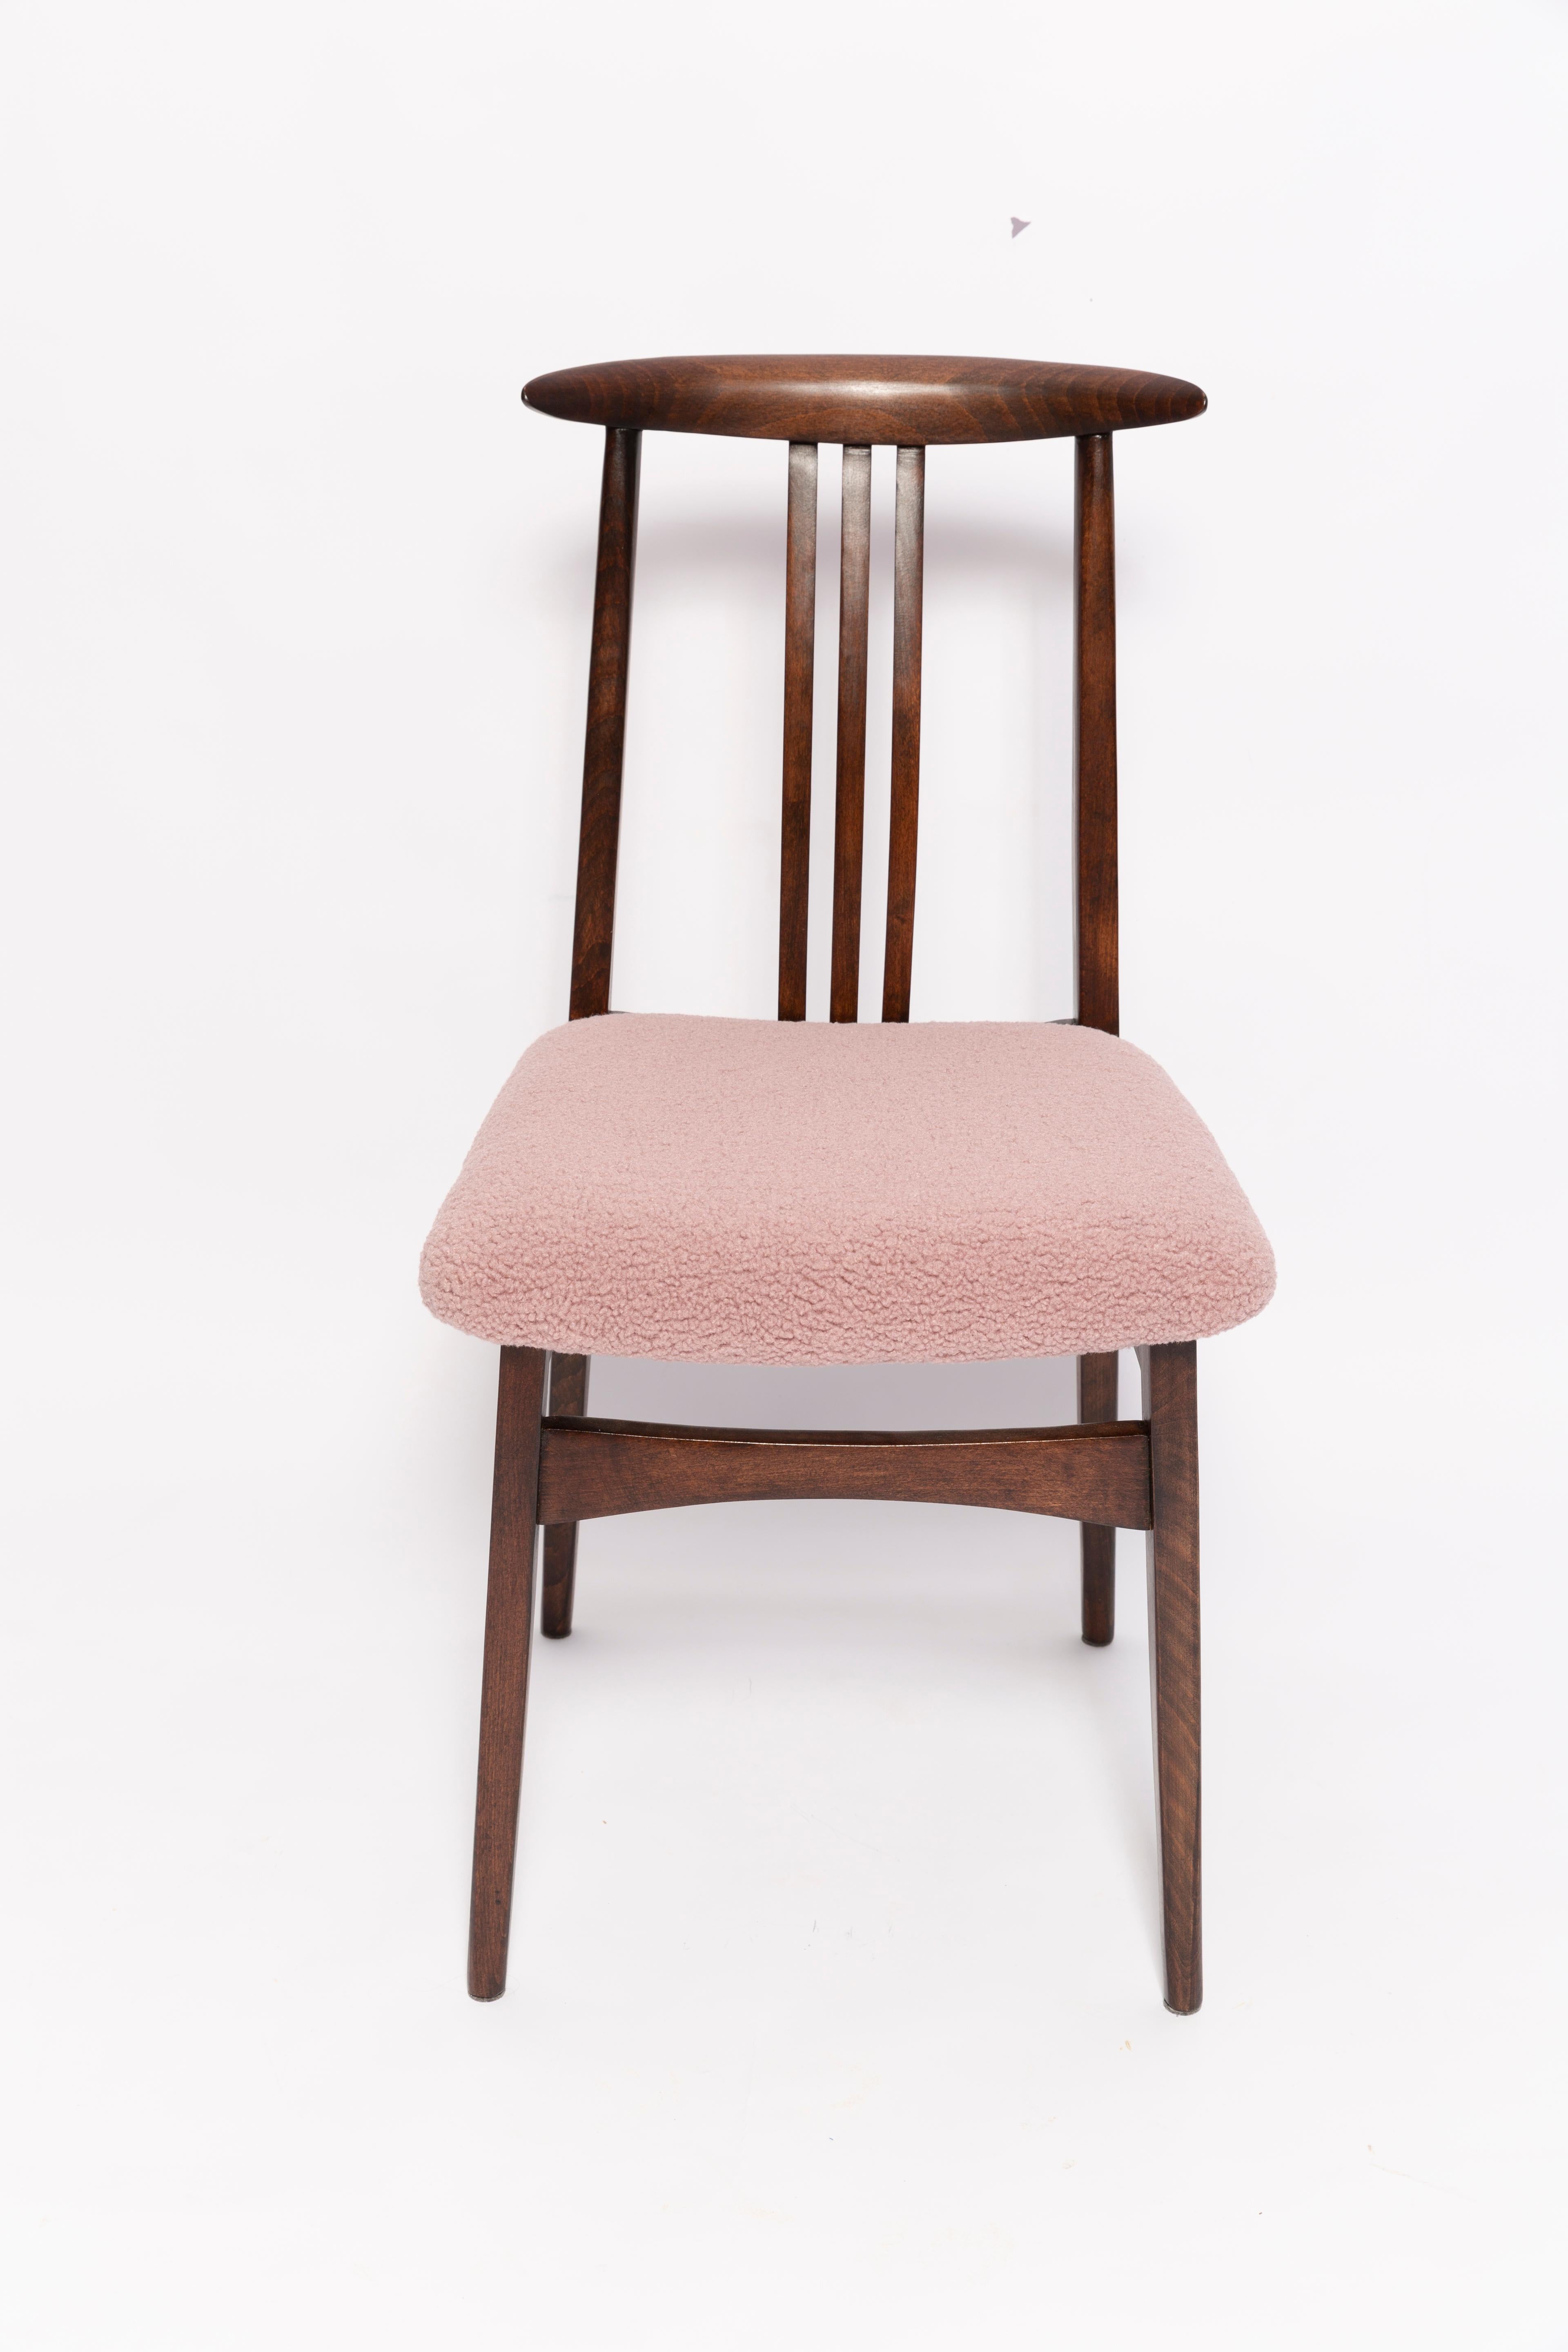 Polish Set of Eight Mid-Century Pink Blush Boucle Chairs by M. Zielinski, Europe, 1960s For Sale